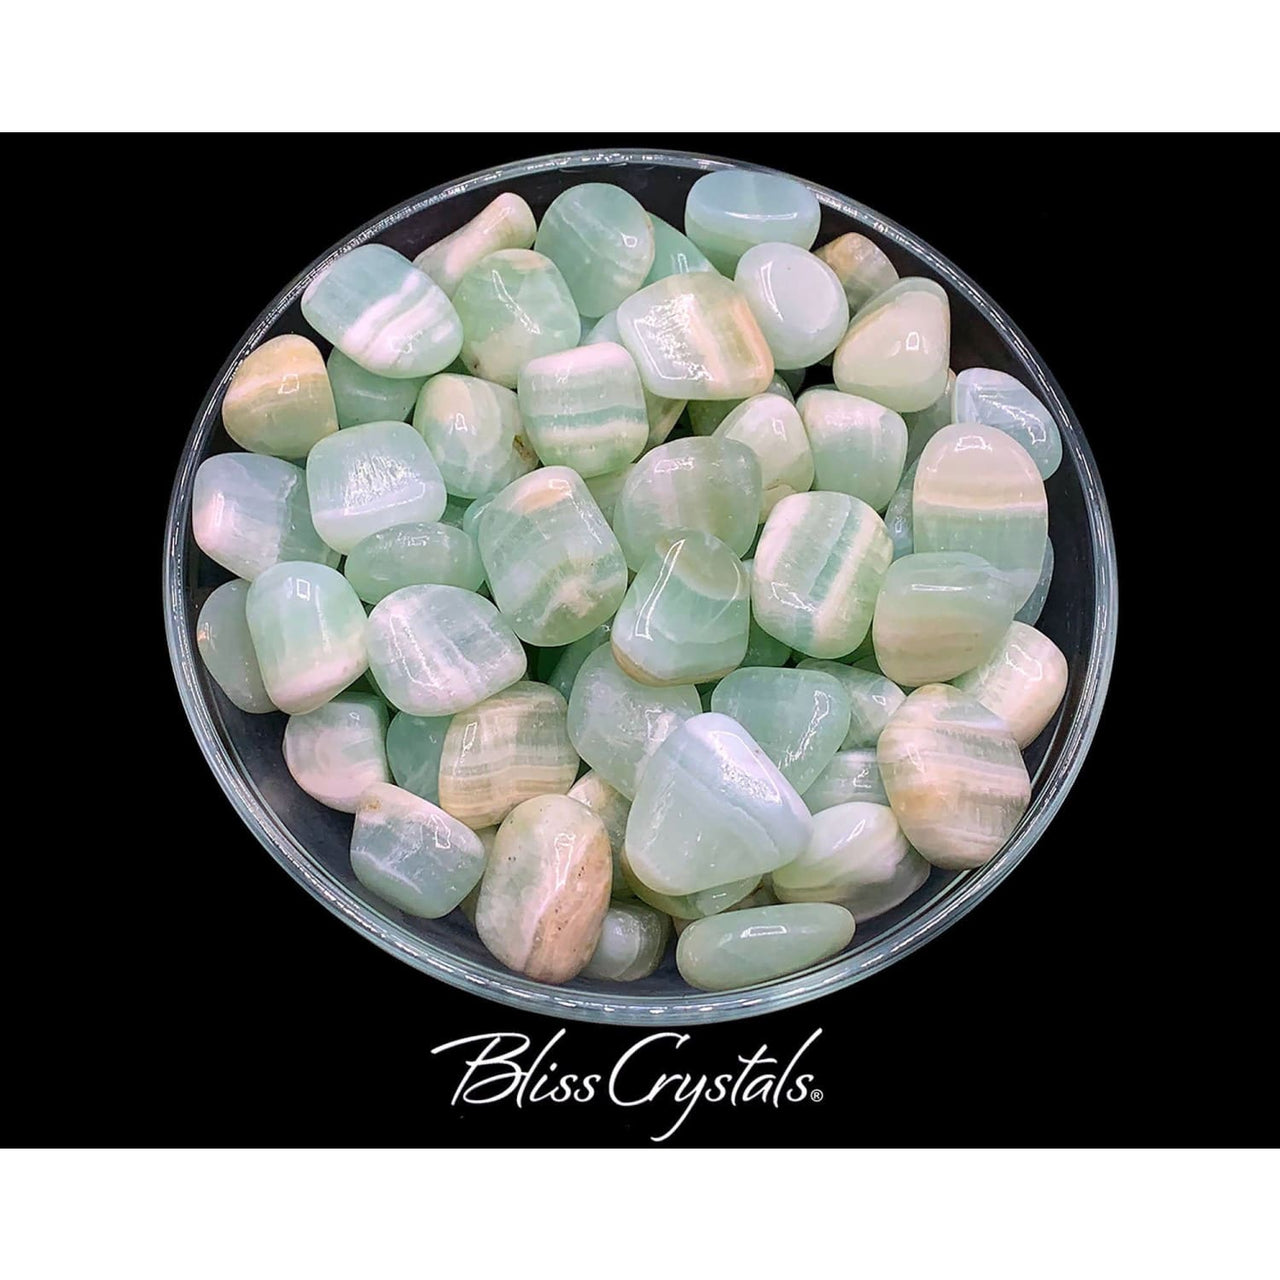 2 Green CALCITE Tumbled Stone Healing Crystal and Stone for 